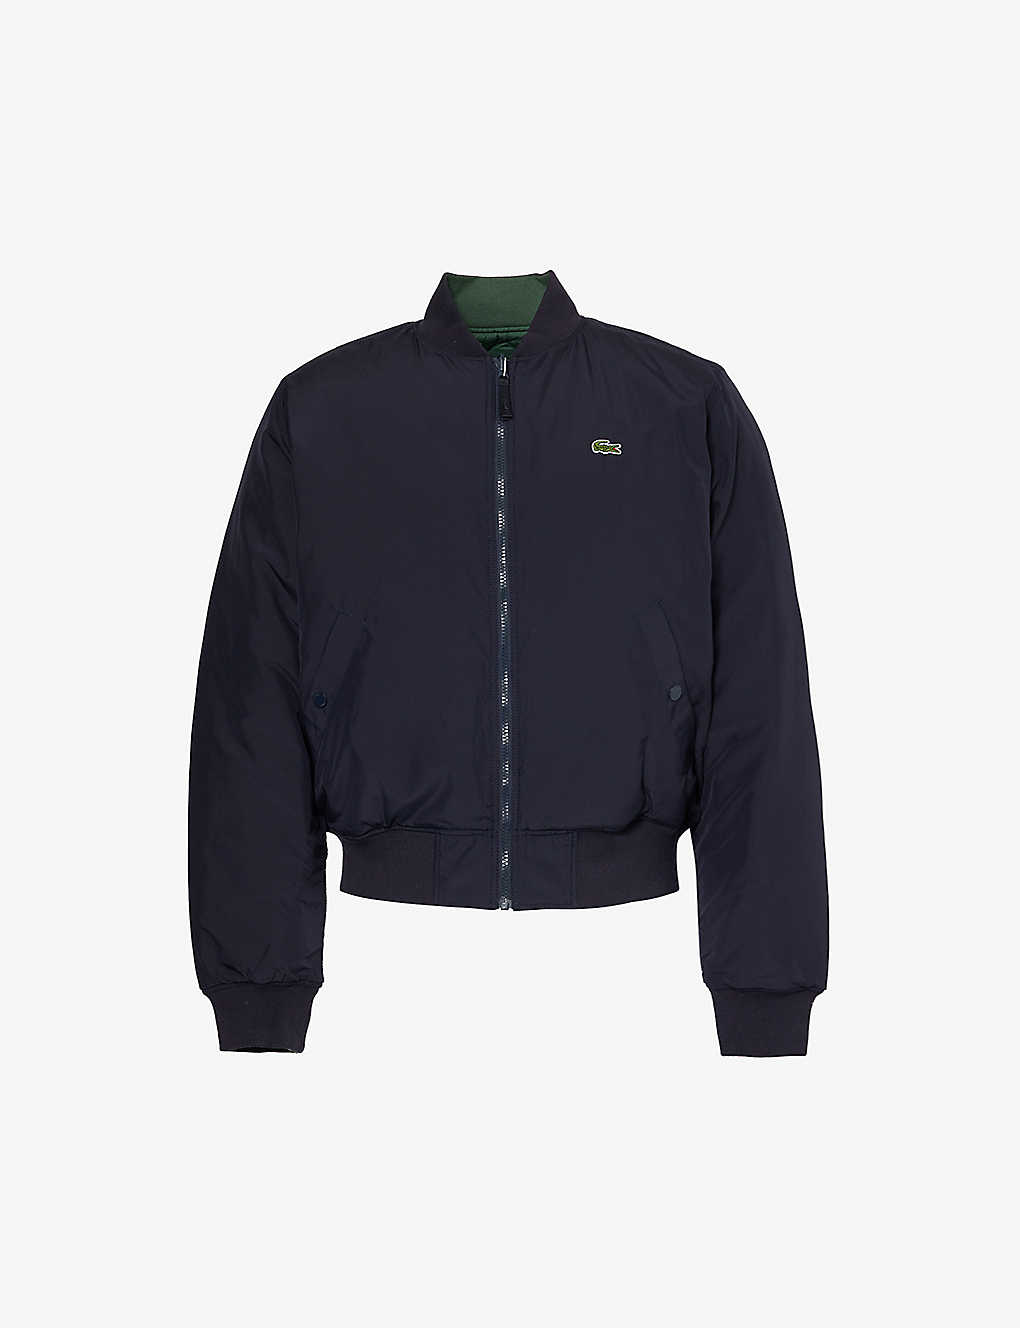 Lacoste Mens Black And Khaki Brand-patch Reversible Shell Jacket In Multi-coloured